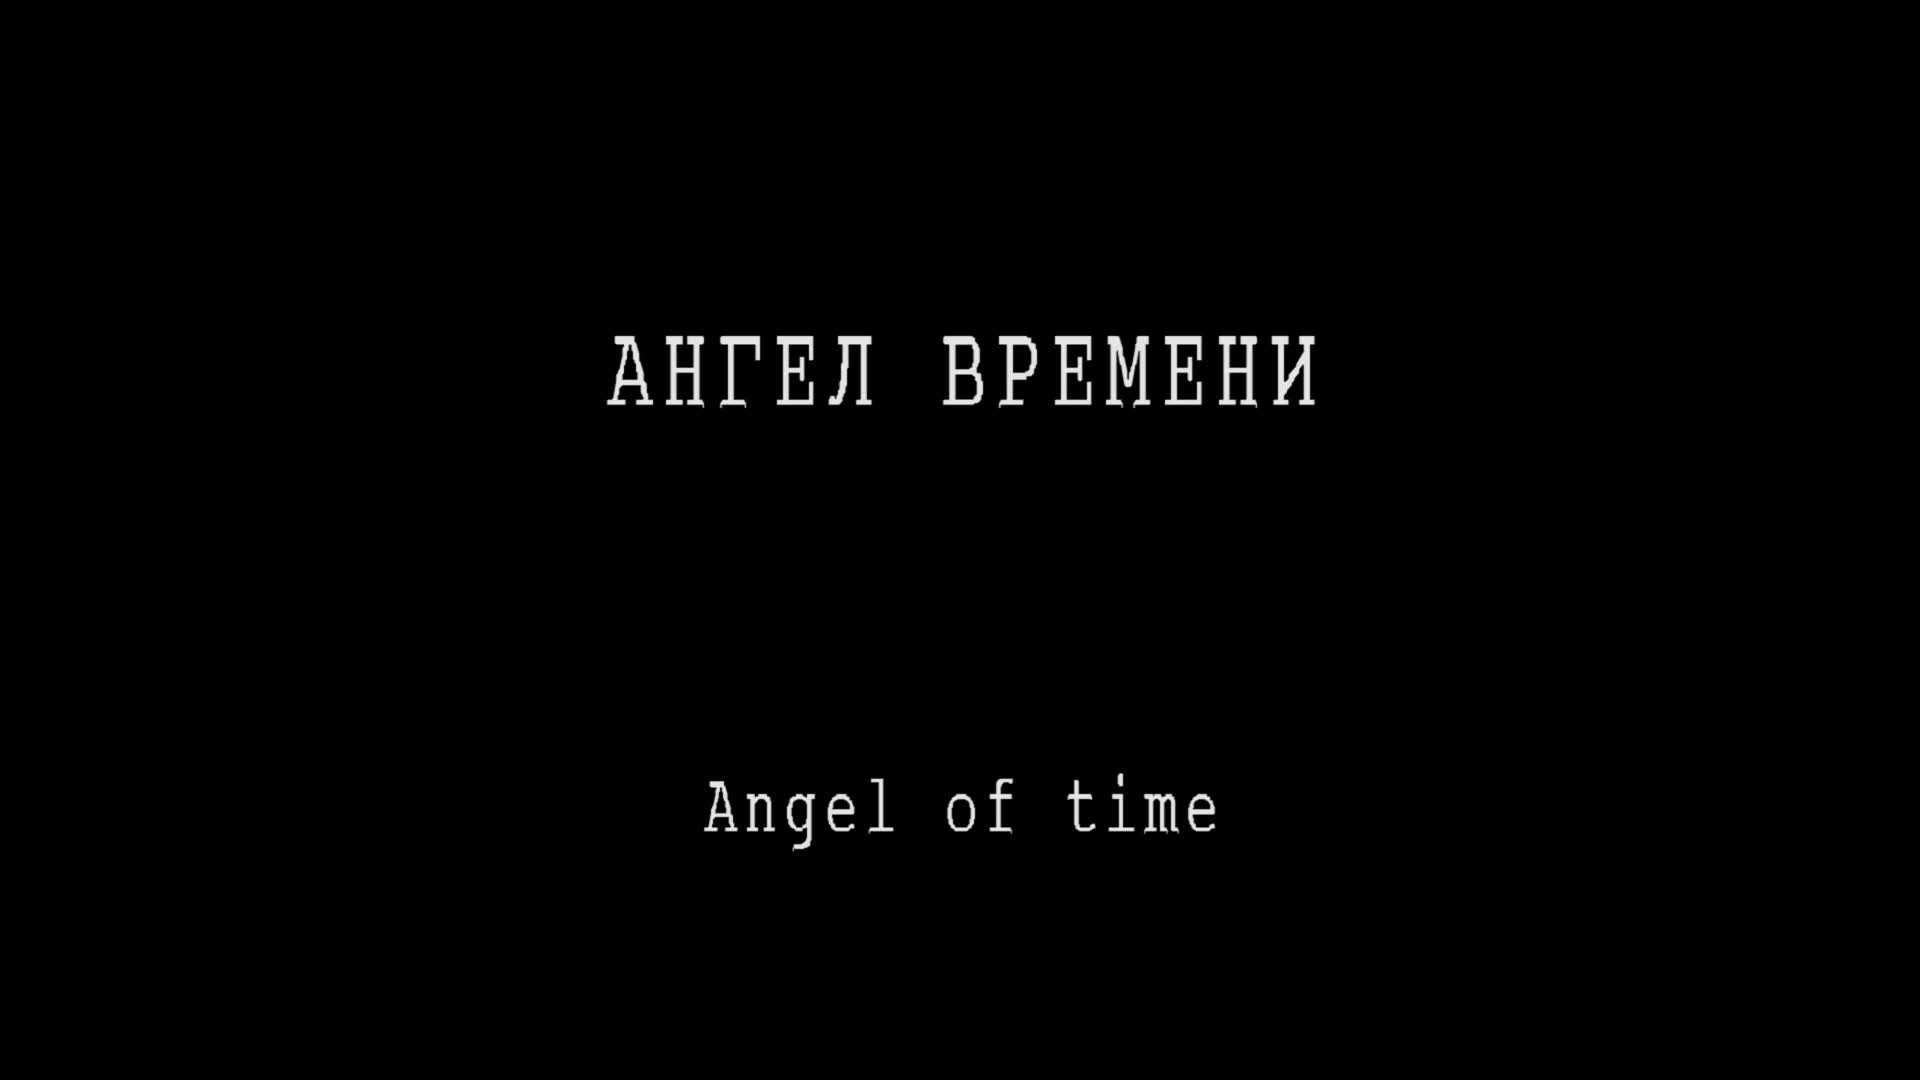 The angel of time